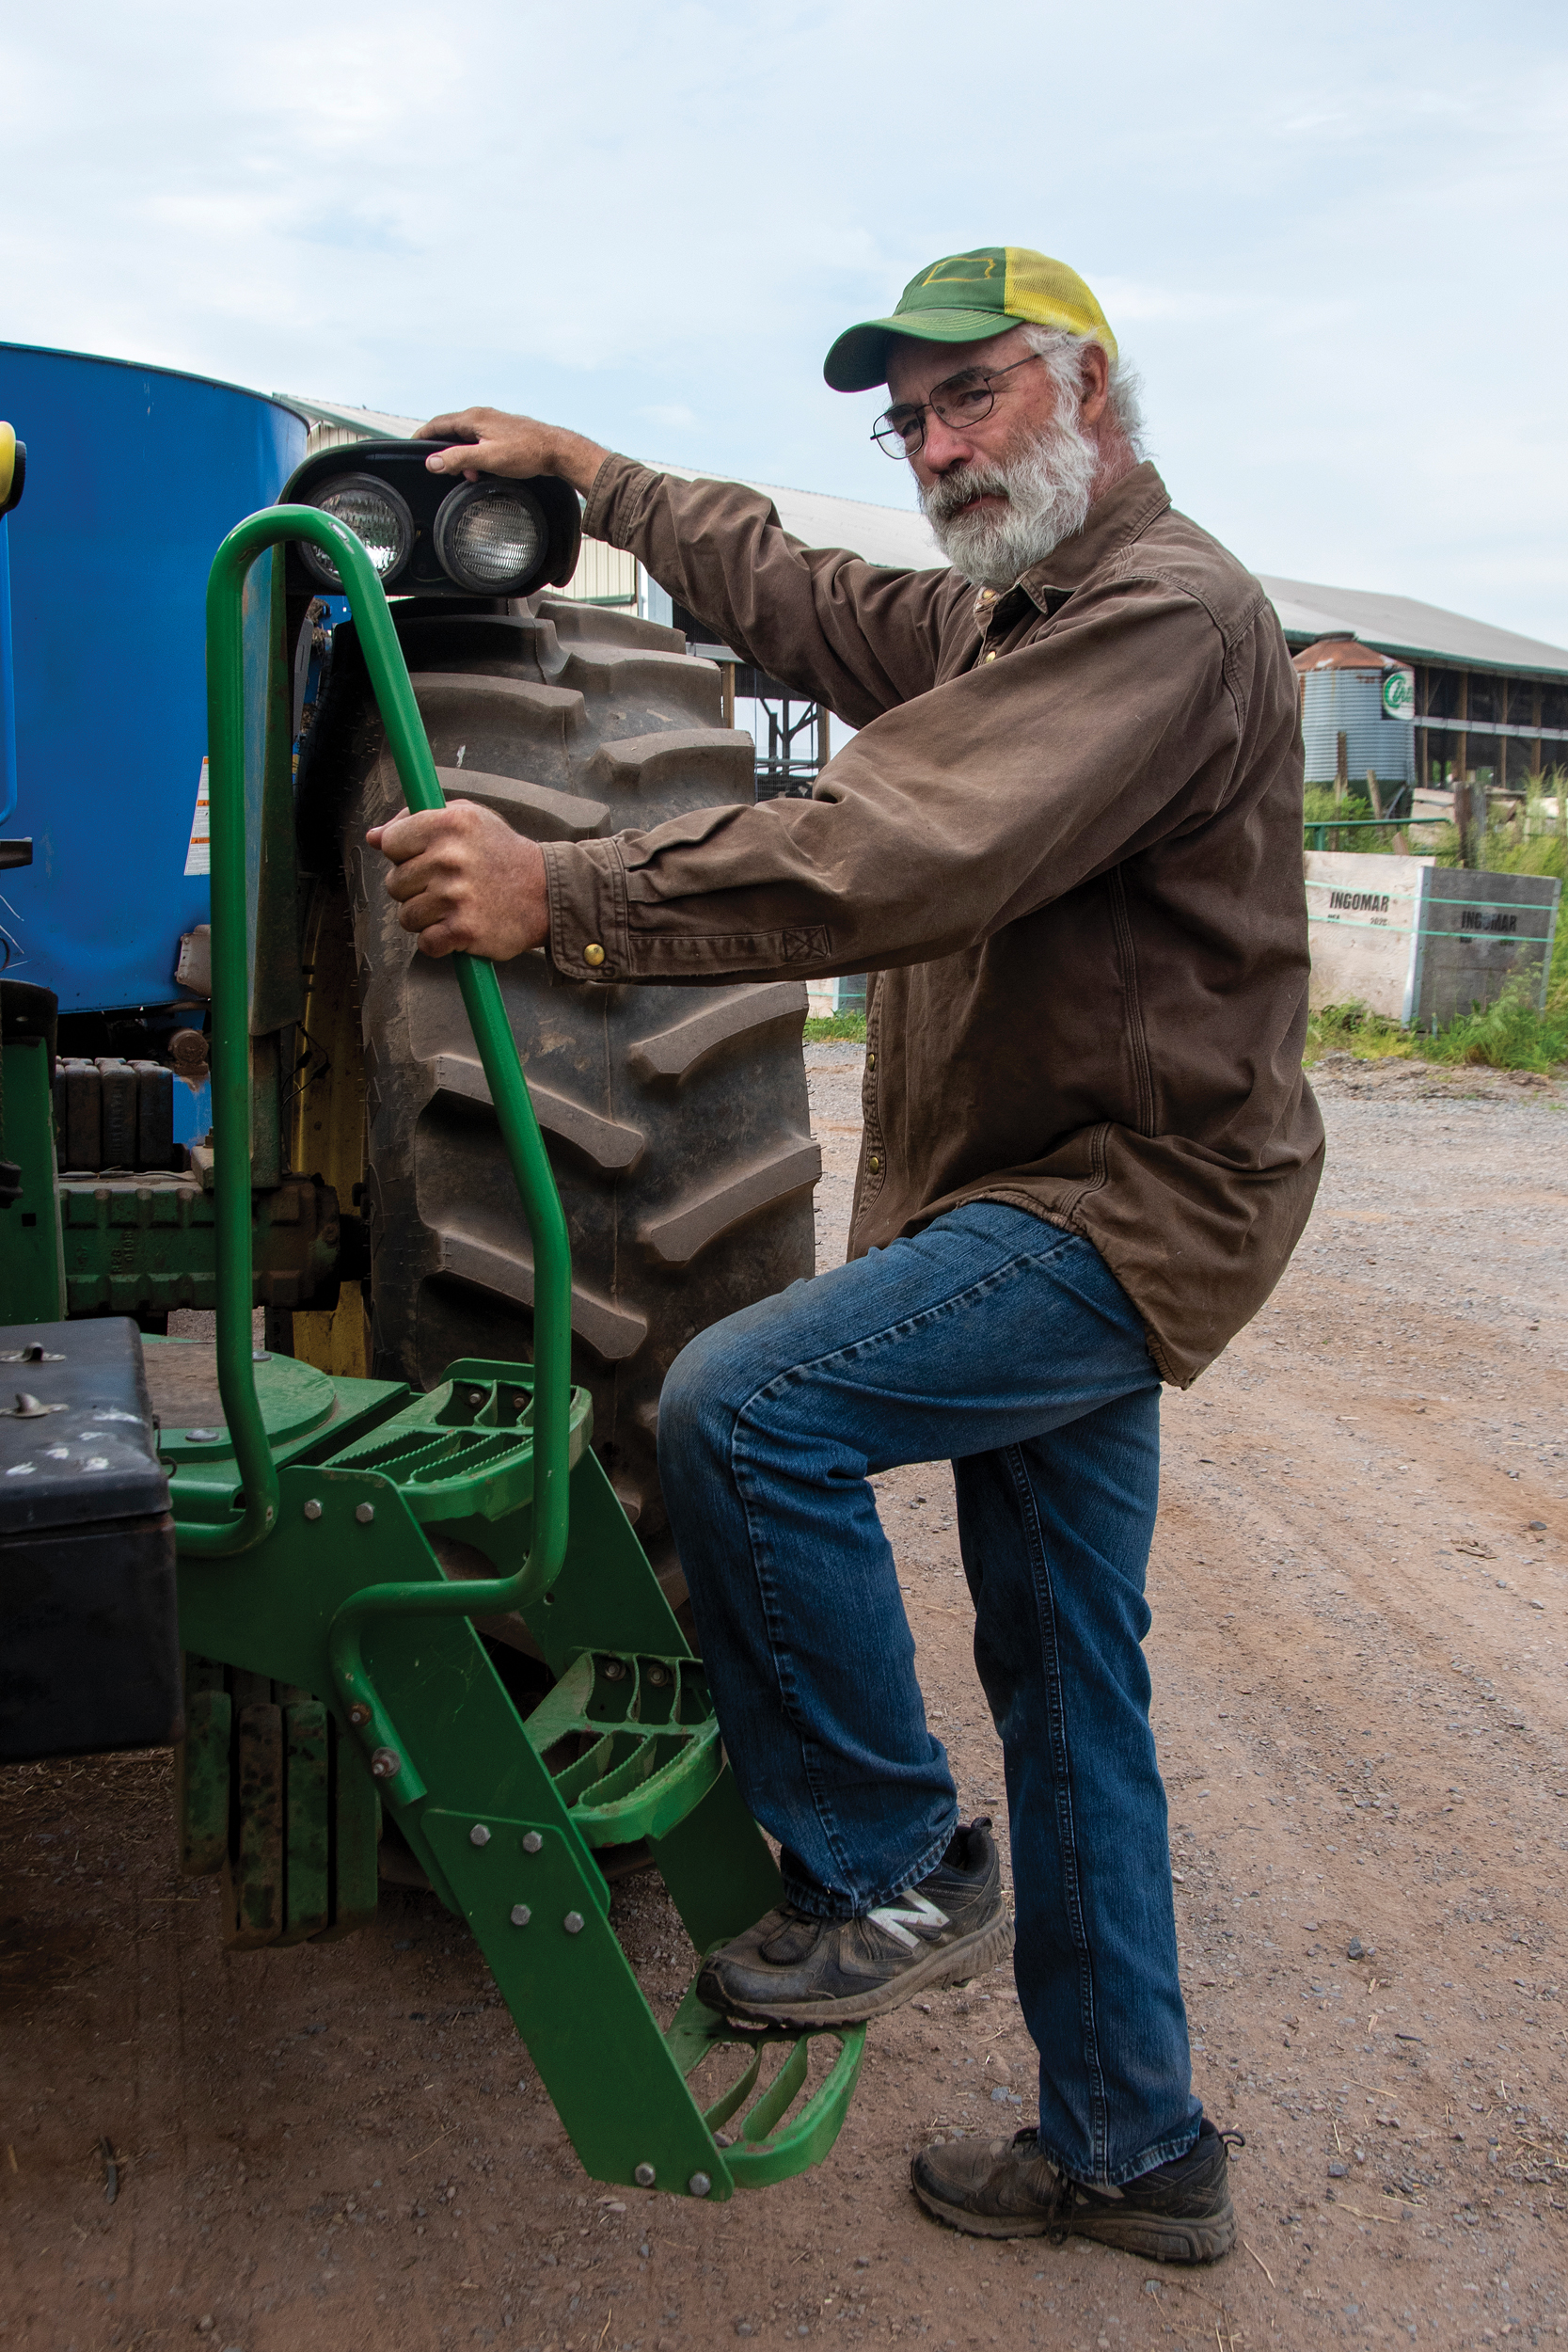 Bob Stanton, co-owner of Manor Meadows Farm in Everett and member of Bedford Rural Electric Cooperative, climbs steps installed on his tractor to ease the burden on his left leg, which has very little muscle tissue left after he suffered a rare disease.